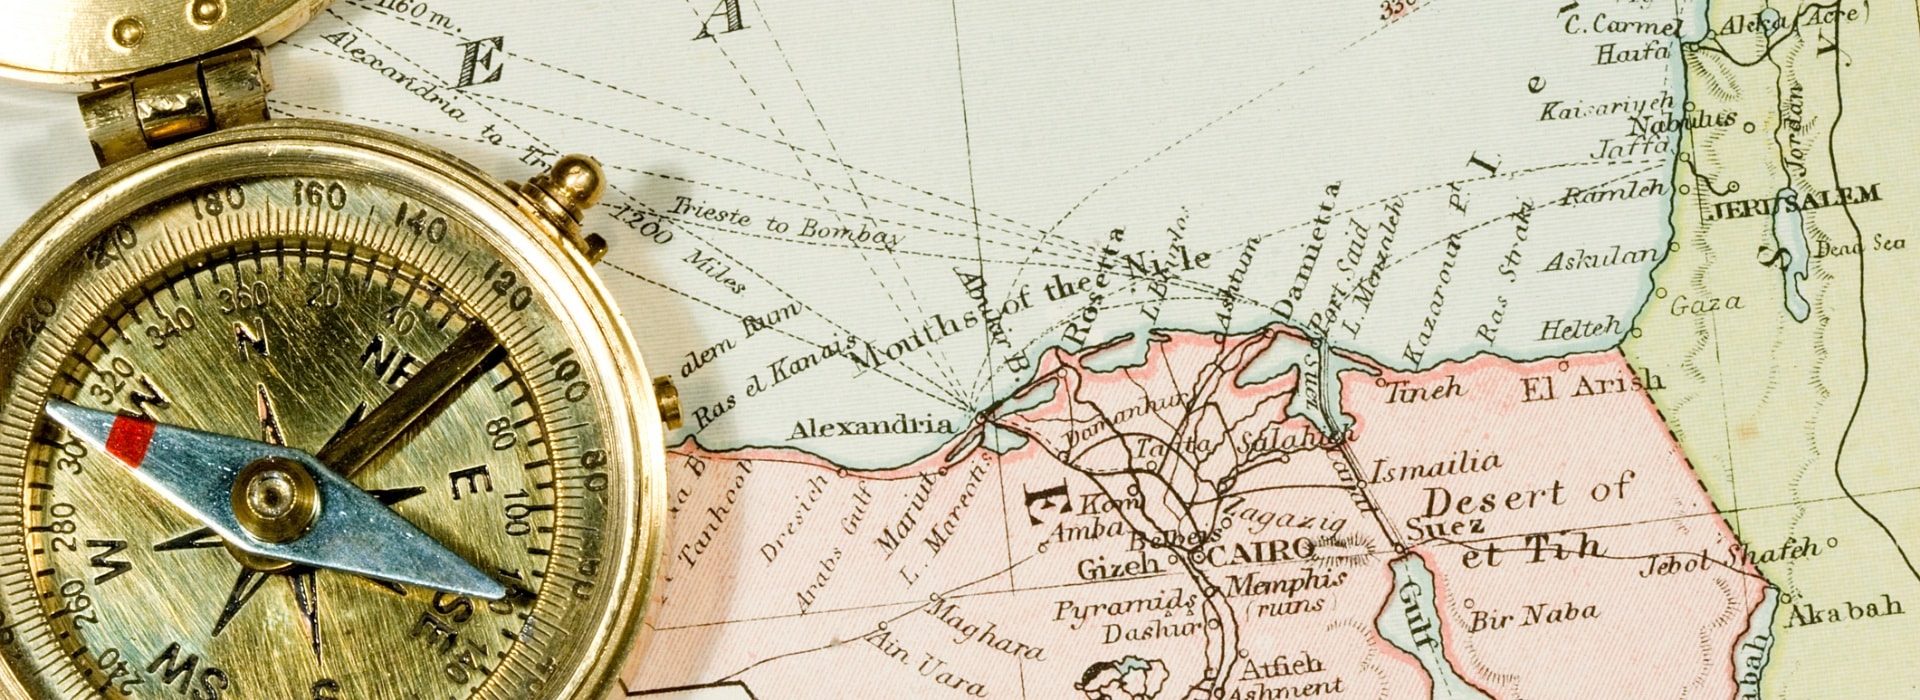 Close up view of a compass and map